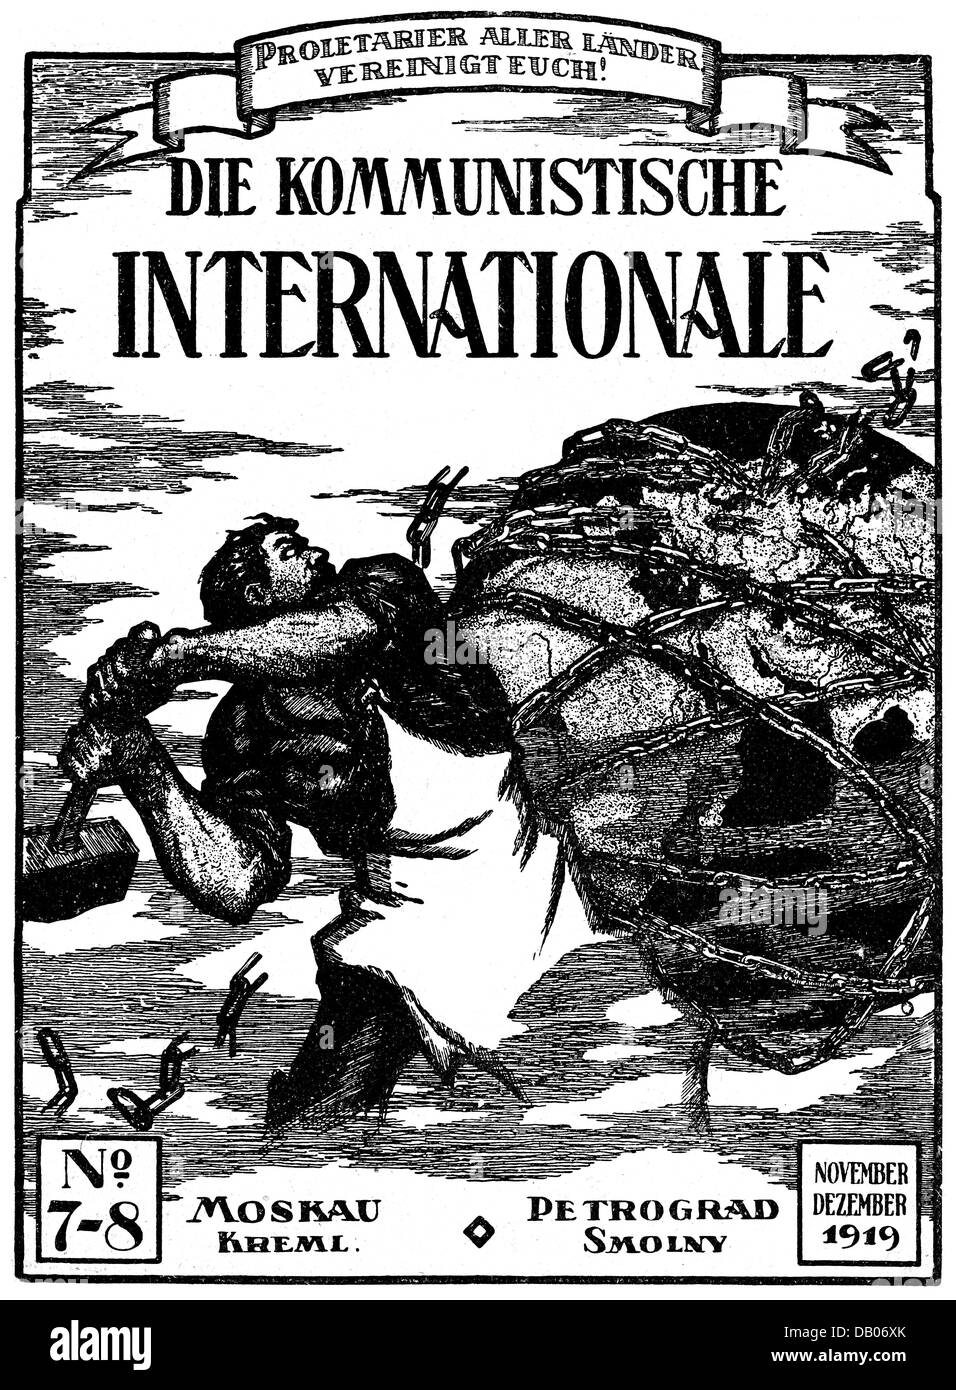 politics, international organization, Communist International (Comintern), journal of the executive committee, cover, number 7 - 8, Moscow and Petrograd, November / December 1919, German edition, communism, propaganda, worker, workers, chain, chains, hammer, hammers, world, worlds, globe, world ball, globes, world balls, Soviet Union, Russia, Third International, 1910s, 10s, 20th century, historic, historical, people, Additional-Rights-Clearences-Not Available Stock Photo